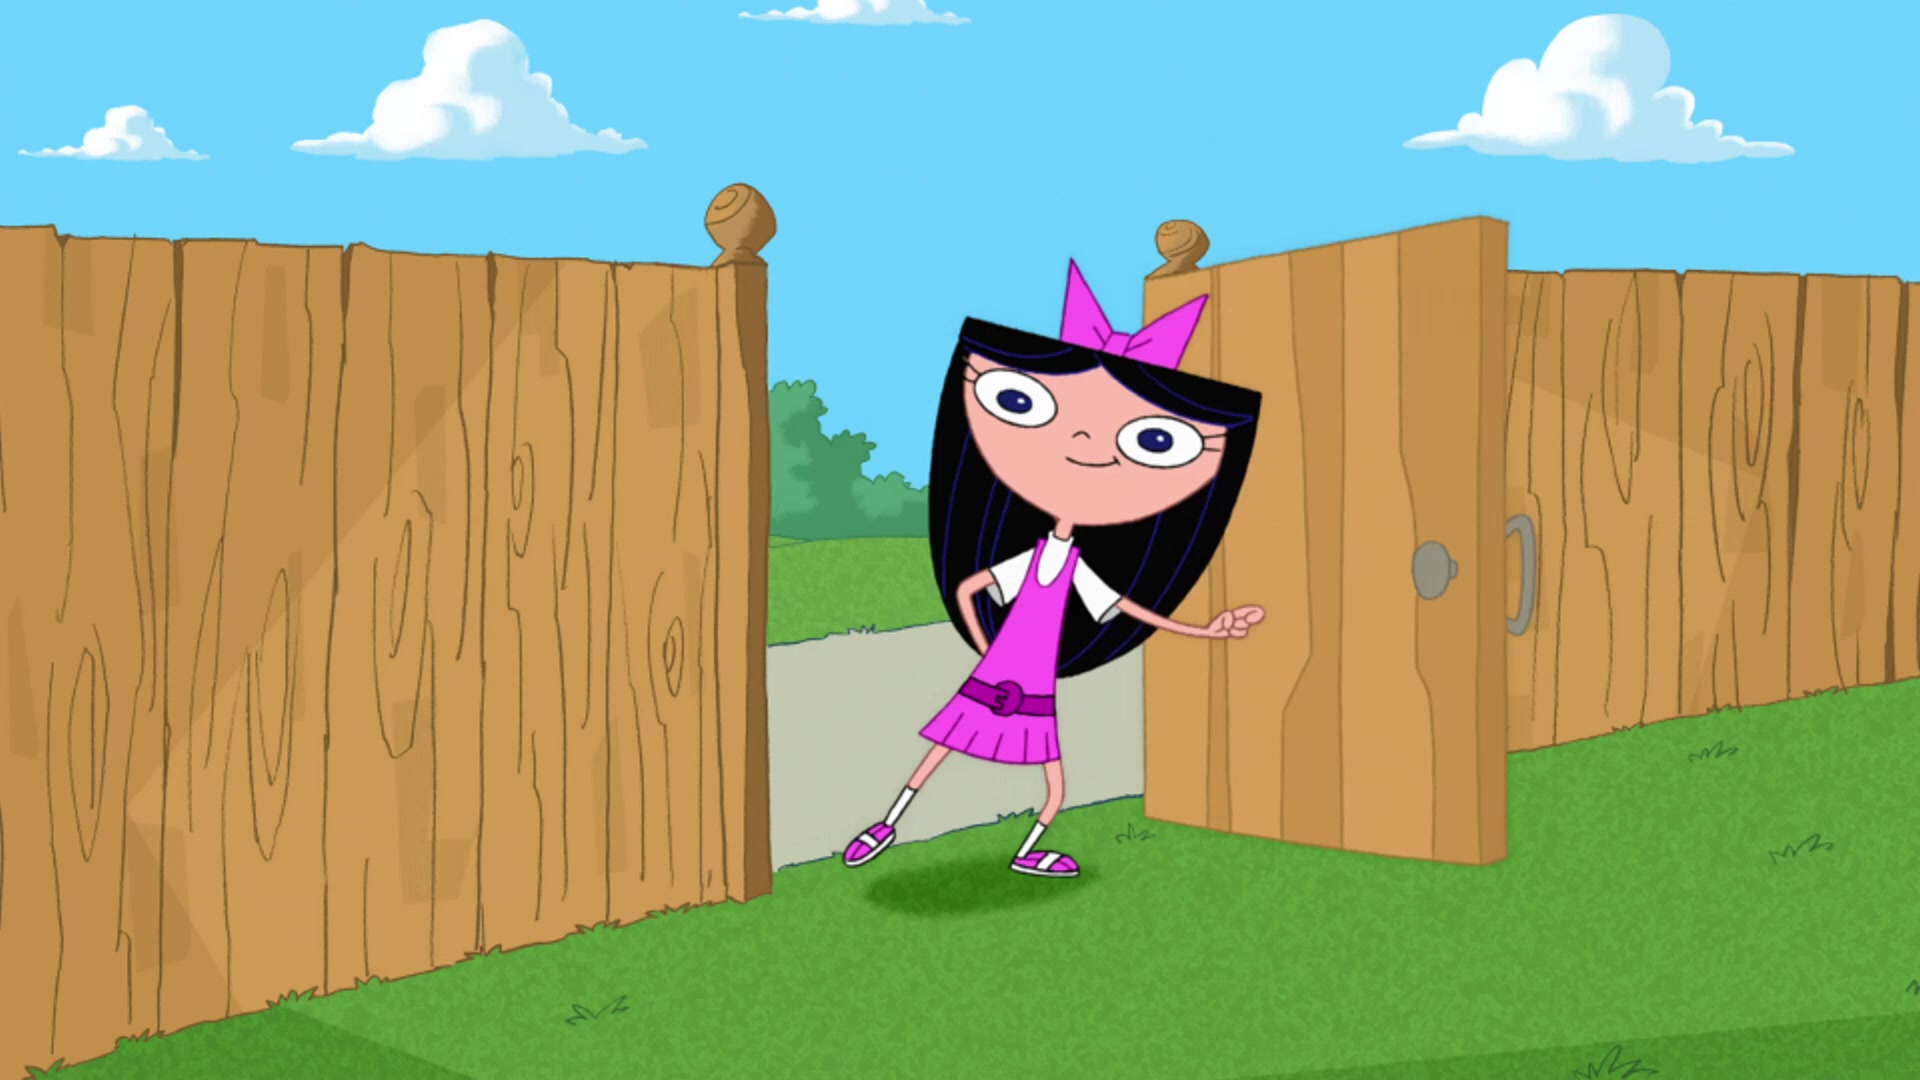 View Fullsize Image From Phineas and Ferb Season 1.